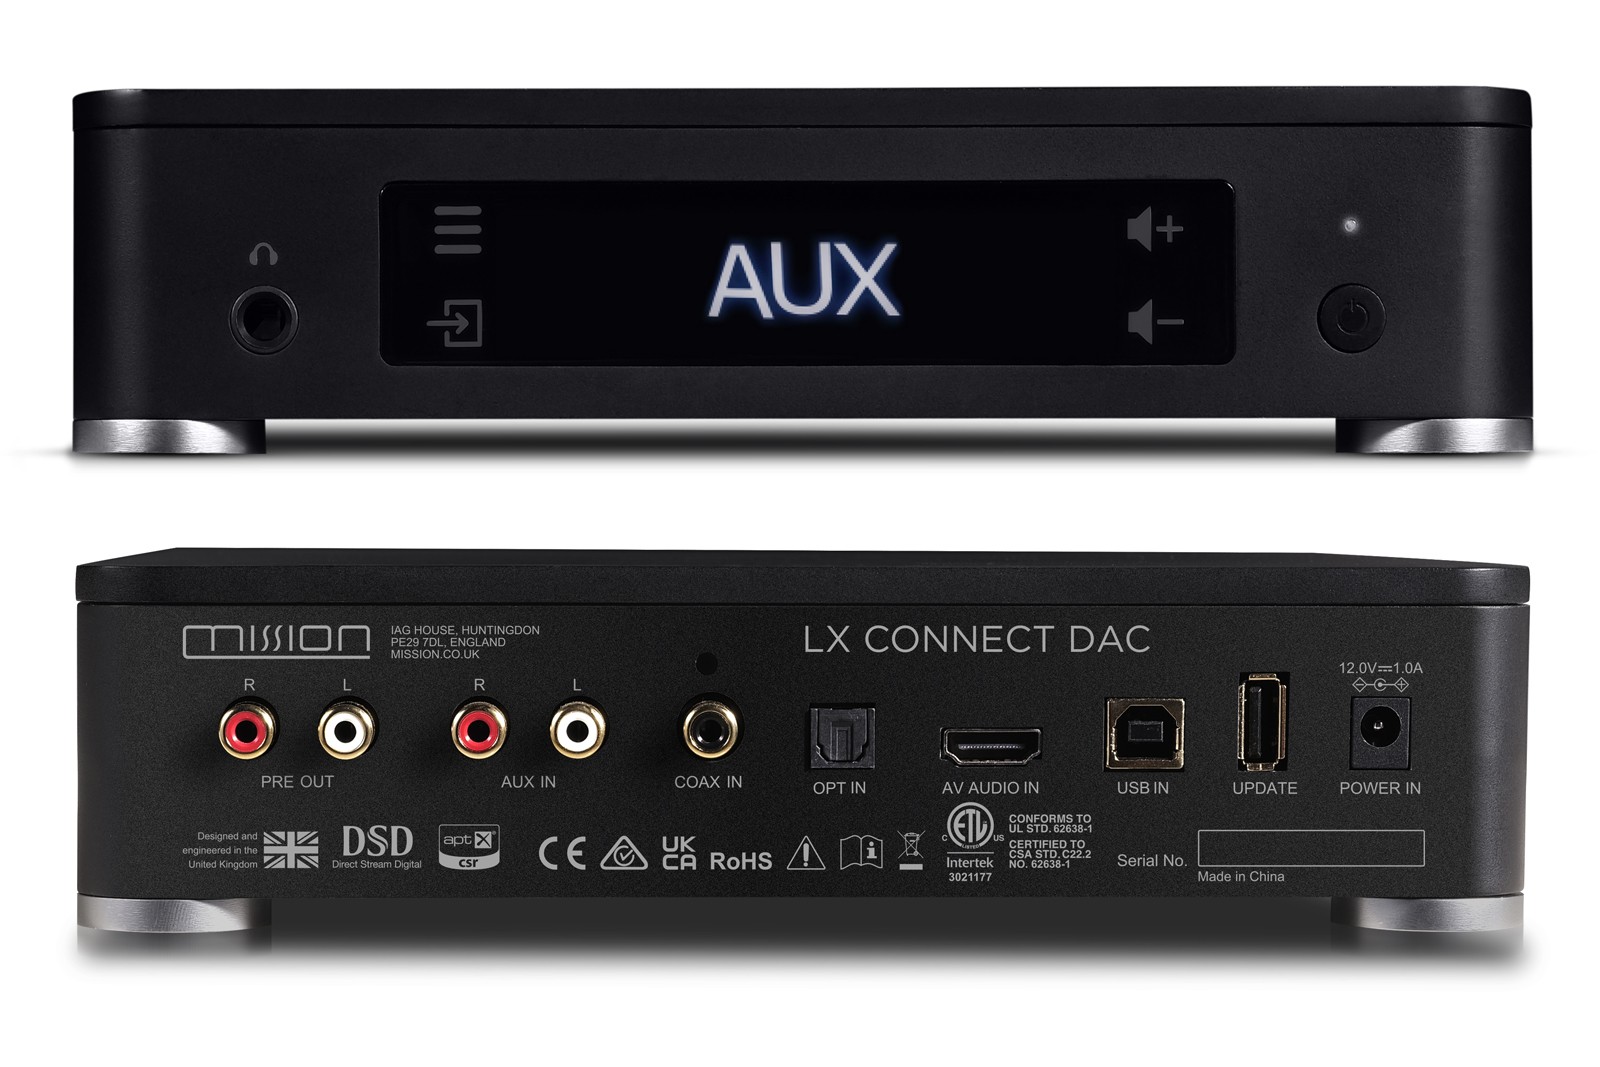 LX CONNECT DAC MISSION